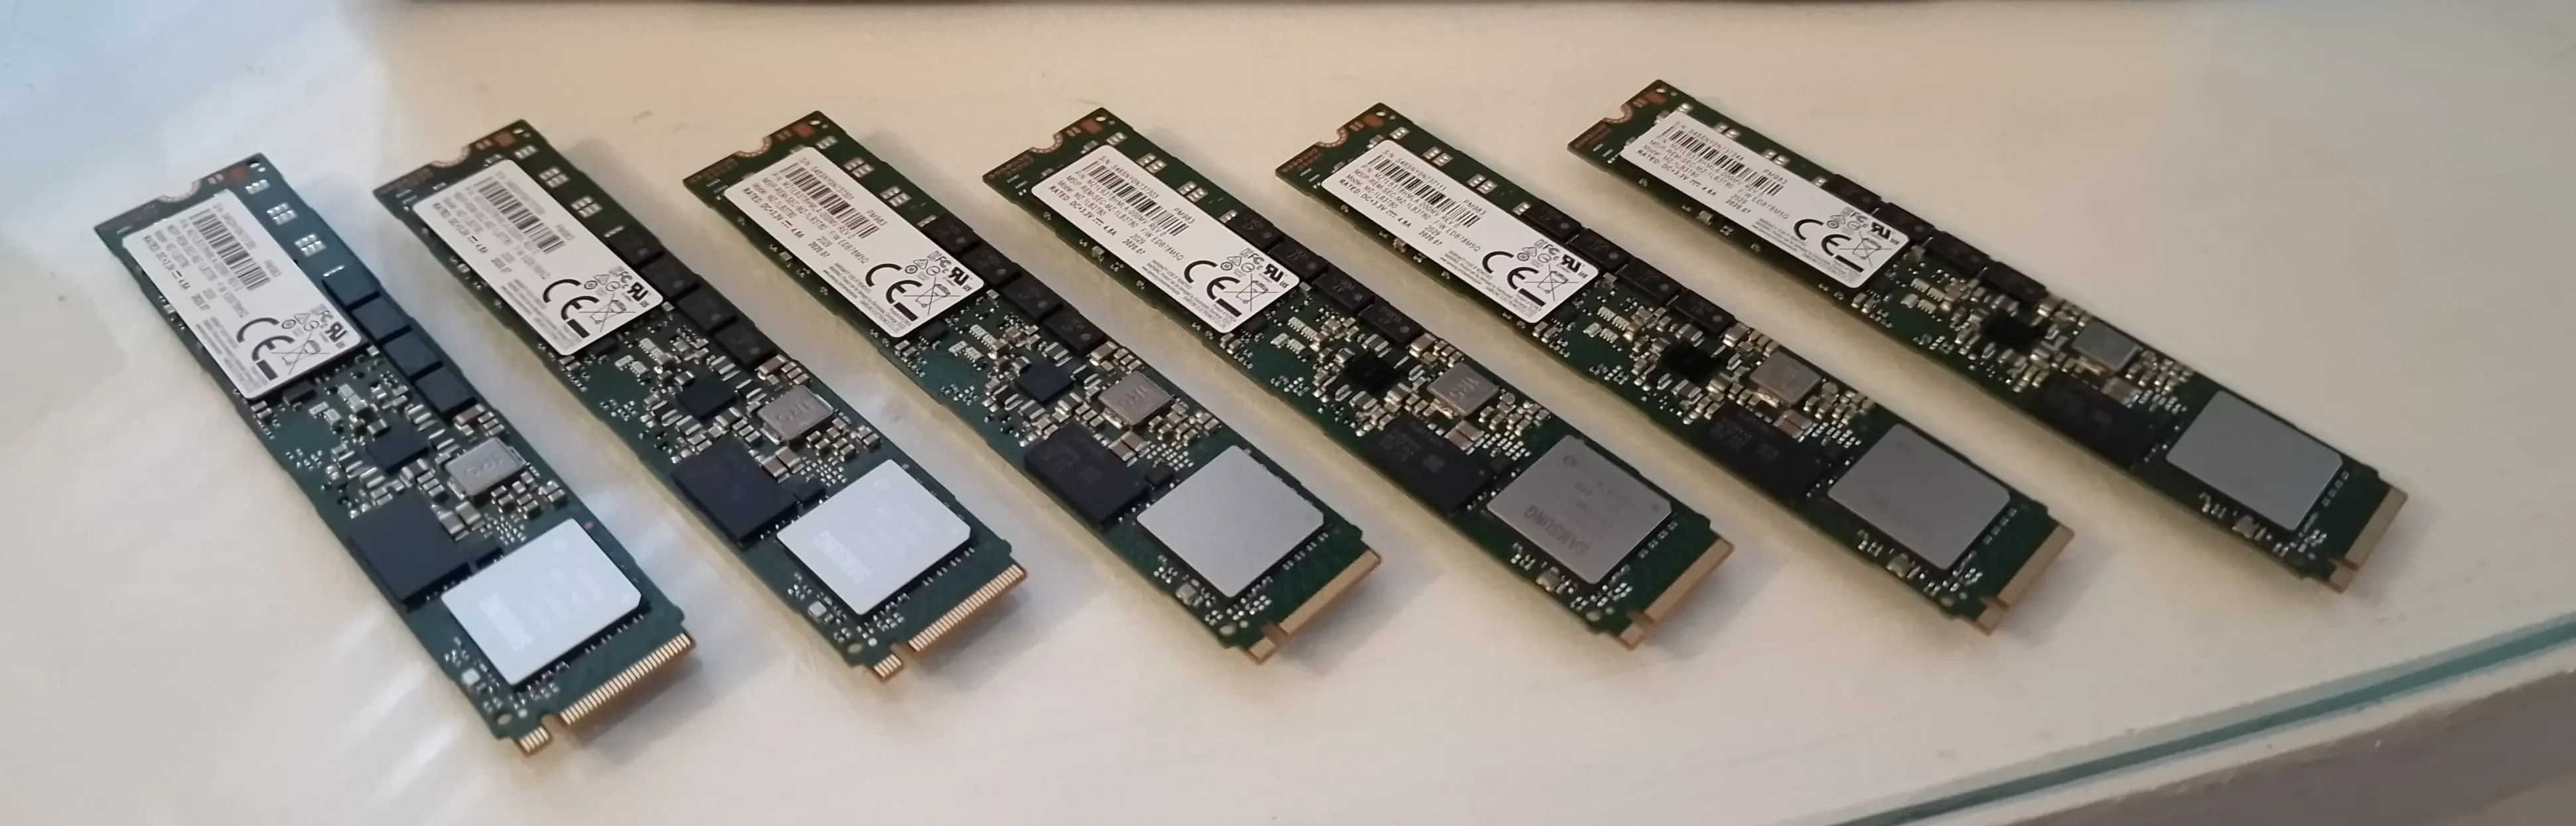 First order of 6 SSDs